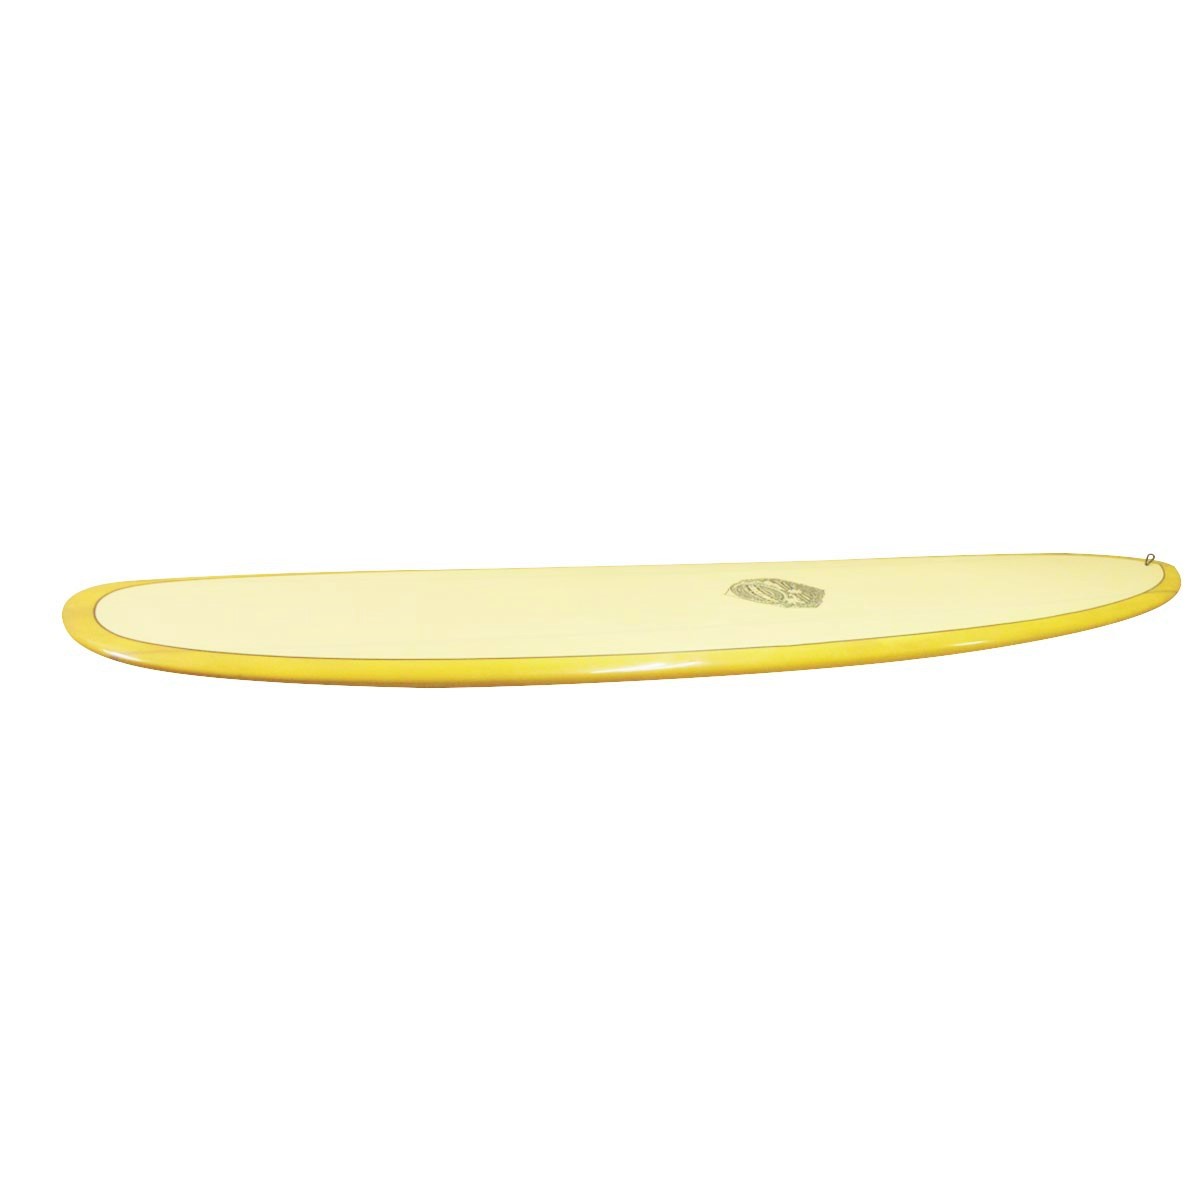 HOBIE / ONE FIN PIN 9`5 Shaped by TERRY MARTIN